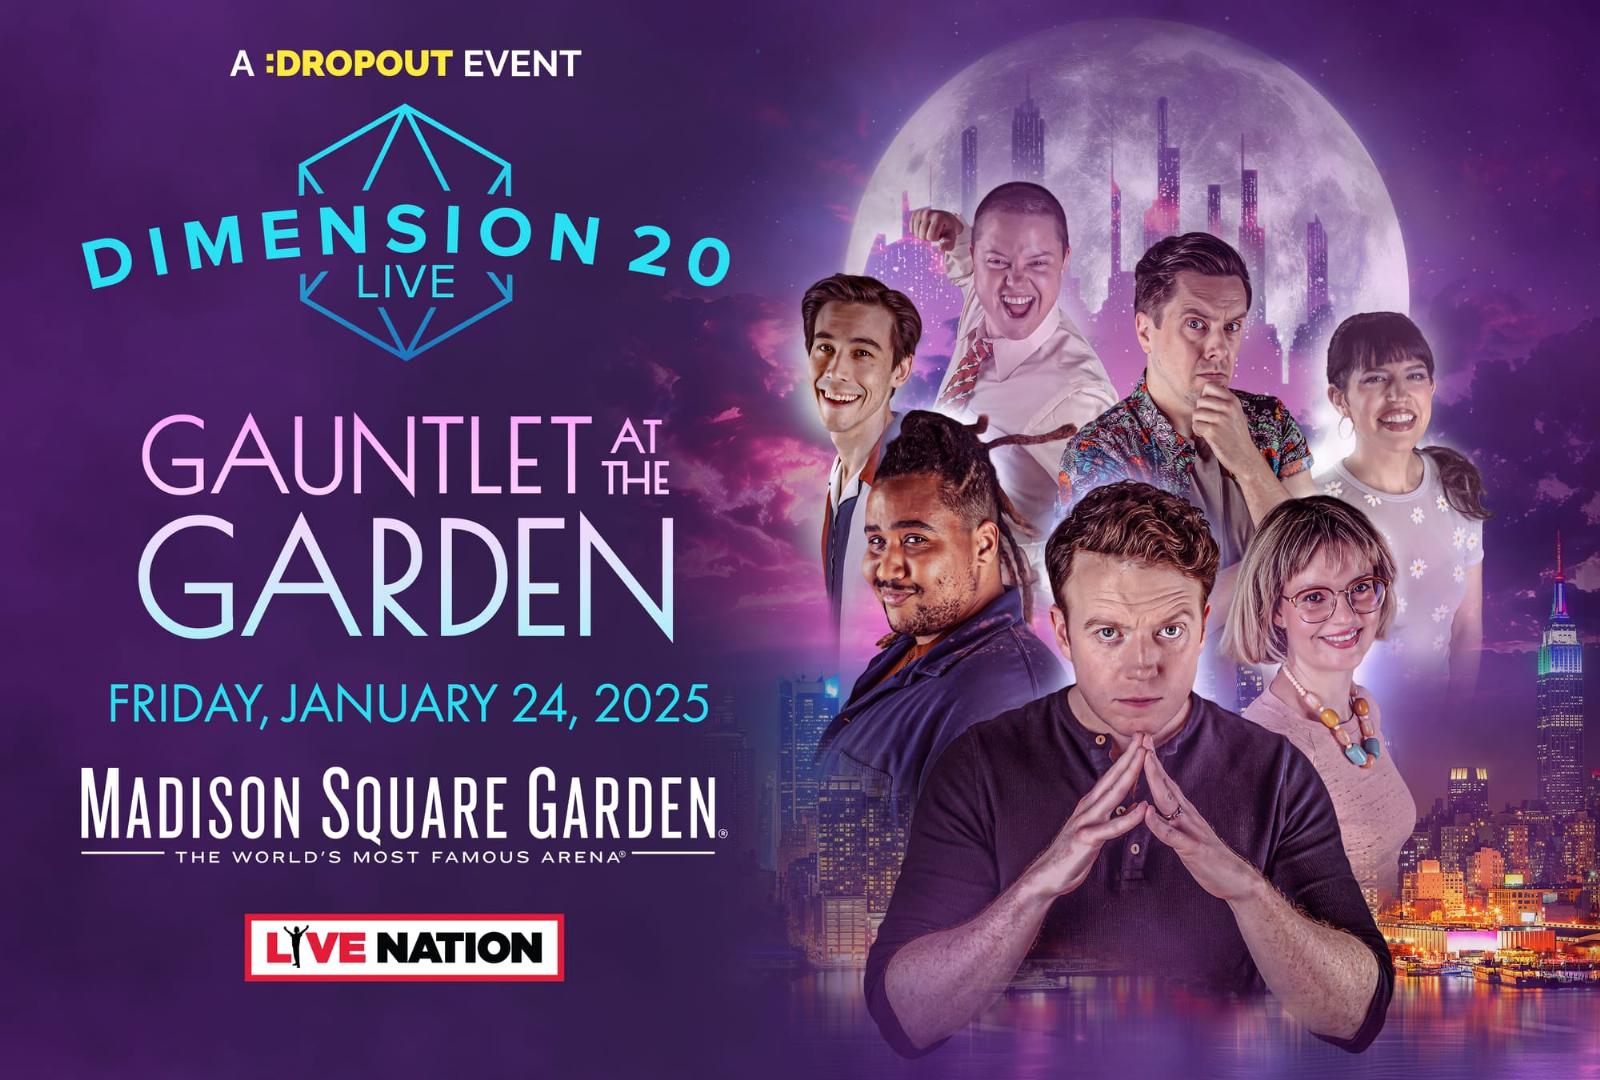 A Dungeons & Dragons actual play show is going to sell out Madison Square Garden